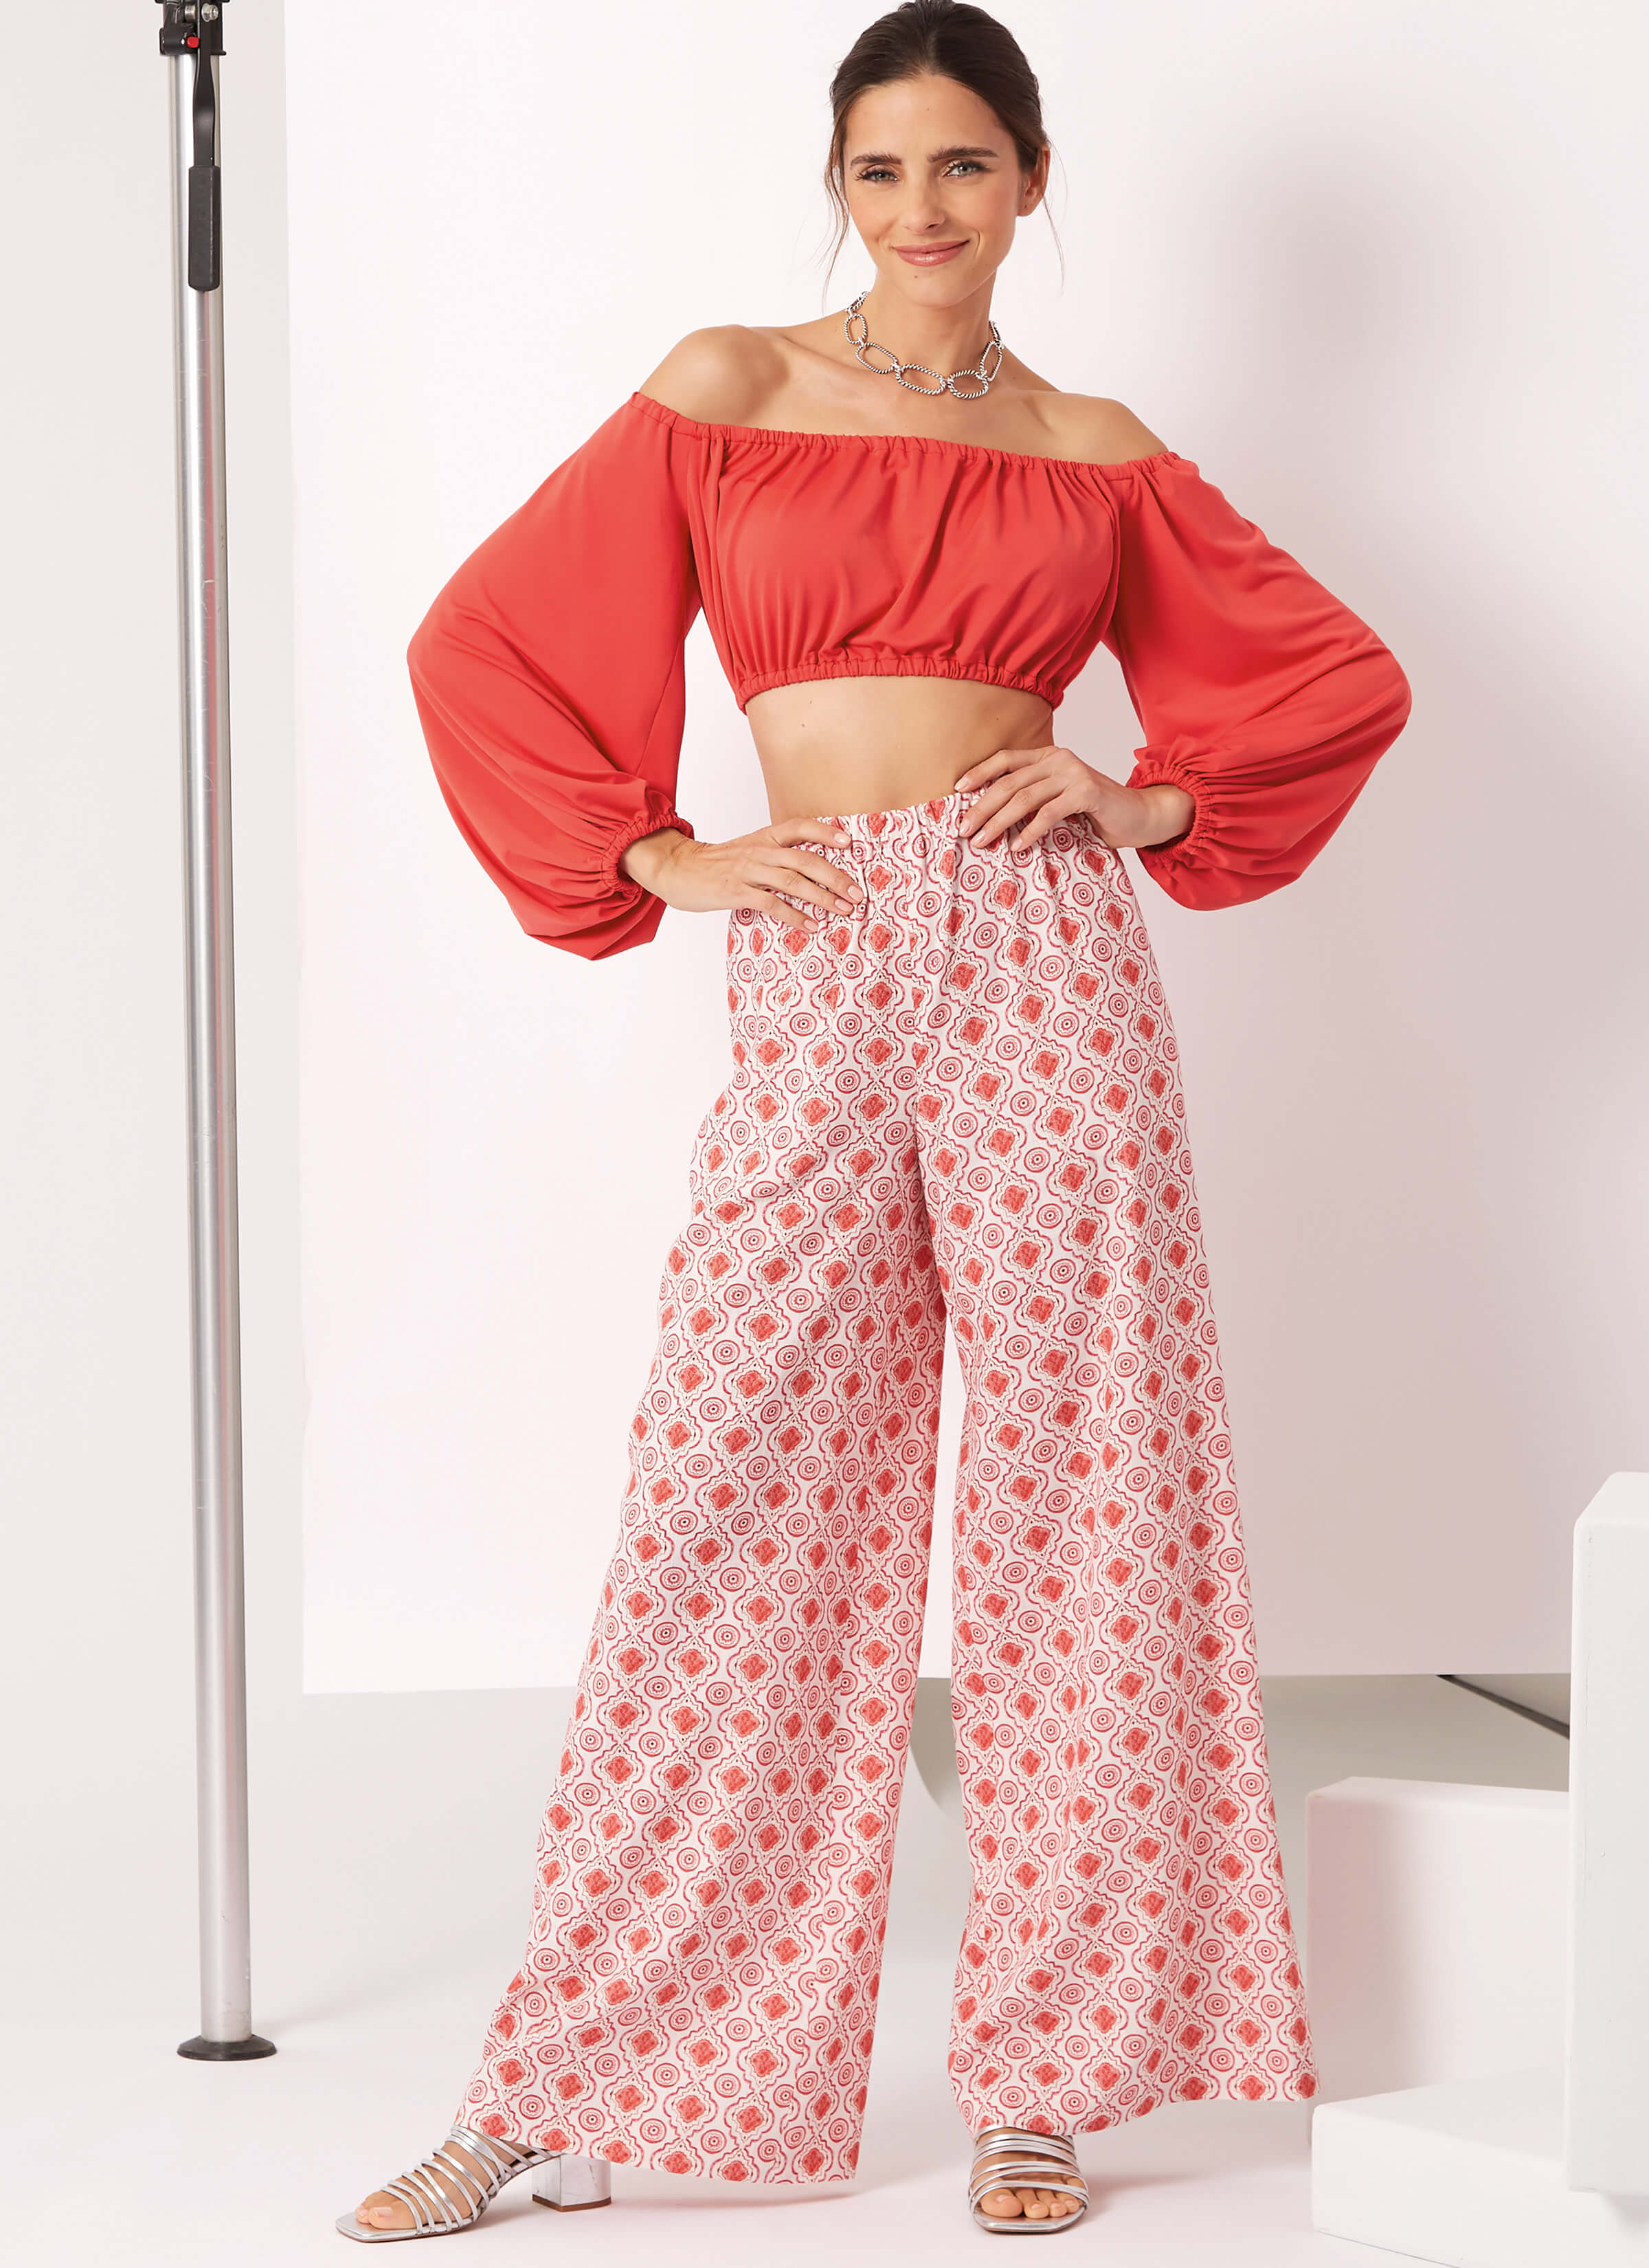 New Look Sewing Pattern N6758 Misses' Top and Trousers